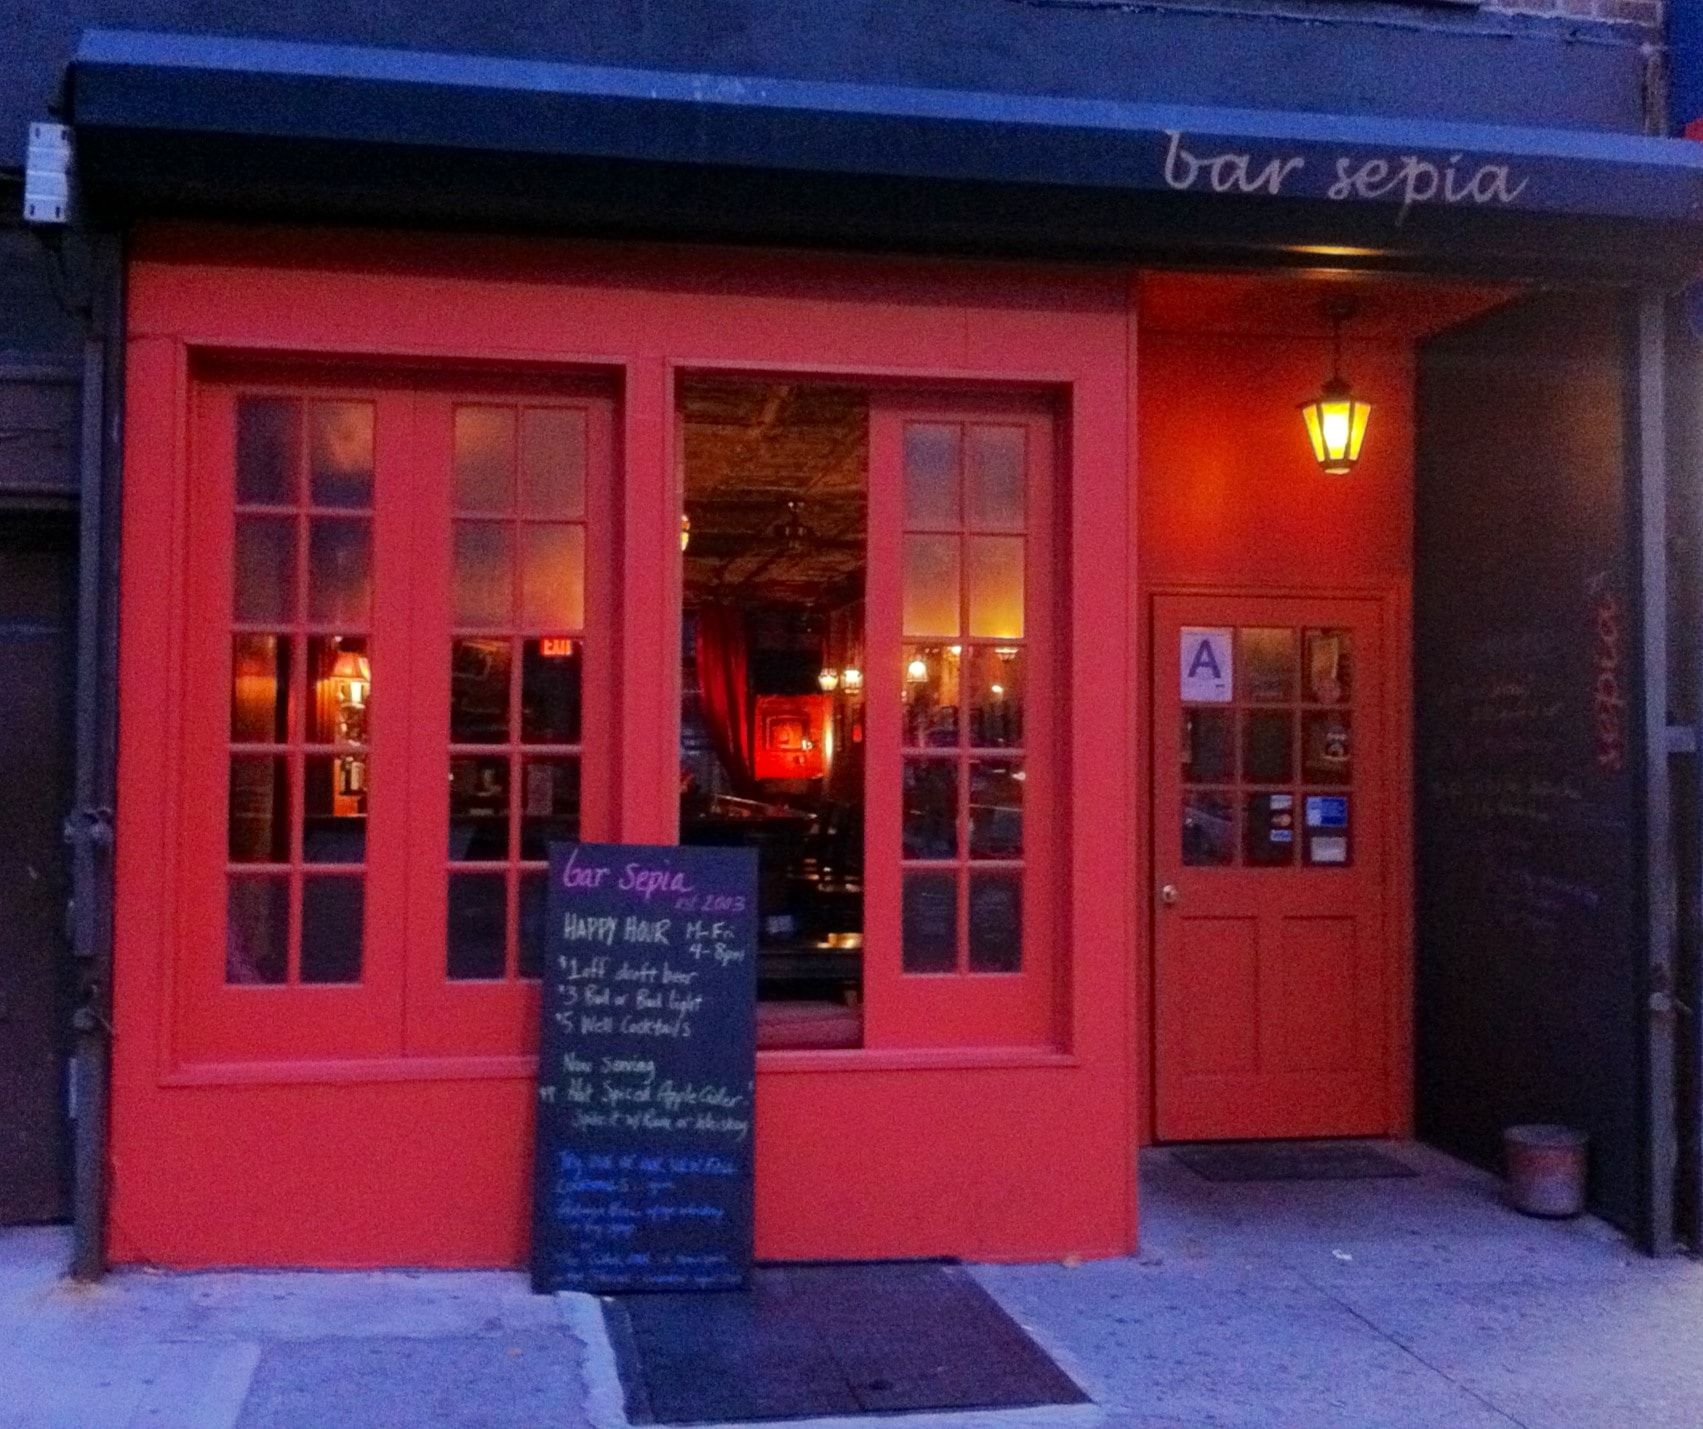 #SaveBarSepia: After 14 Years, Beloved Prospect Heights Bar Slated To Close